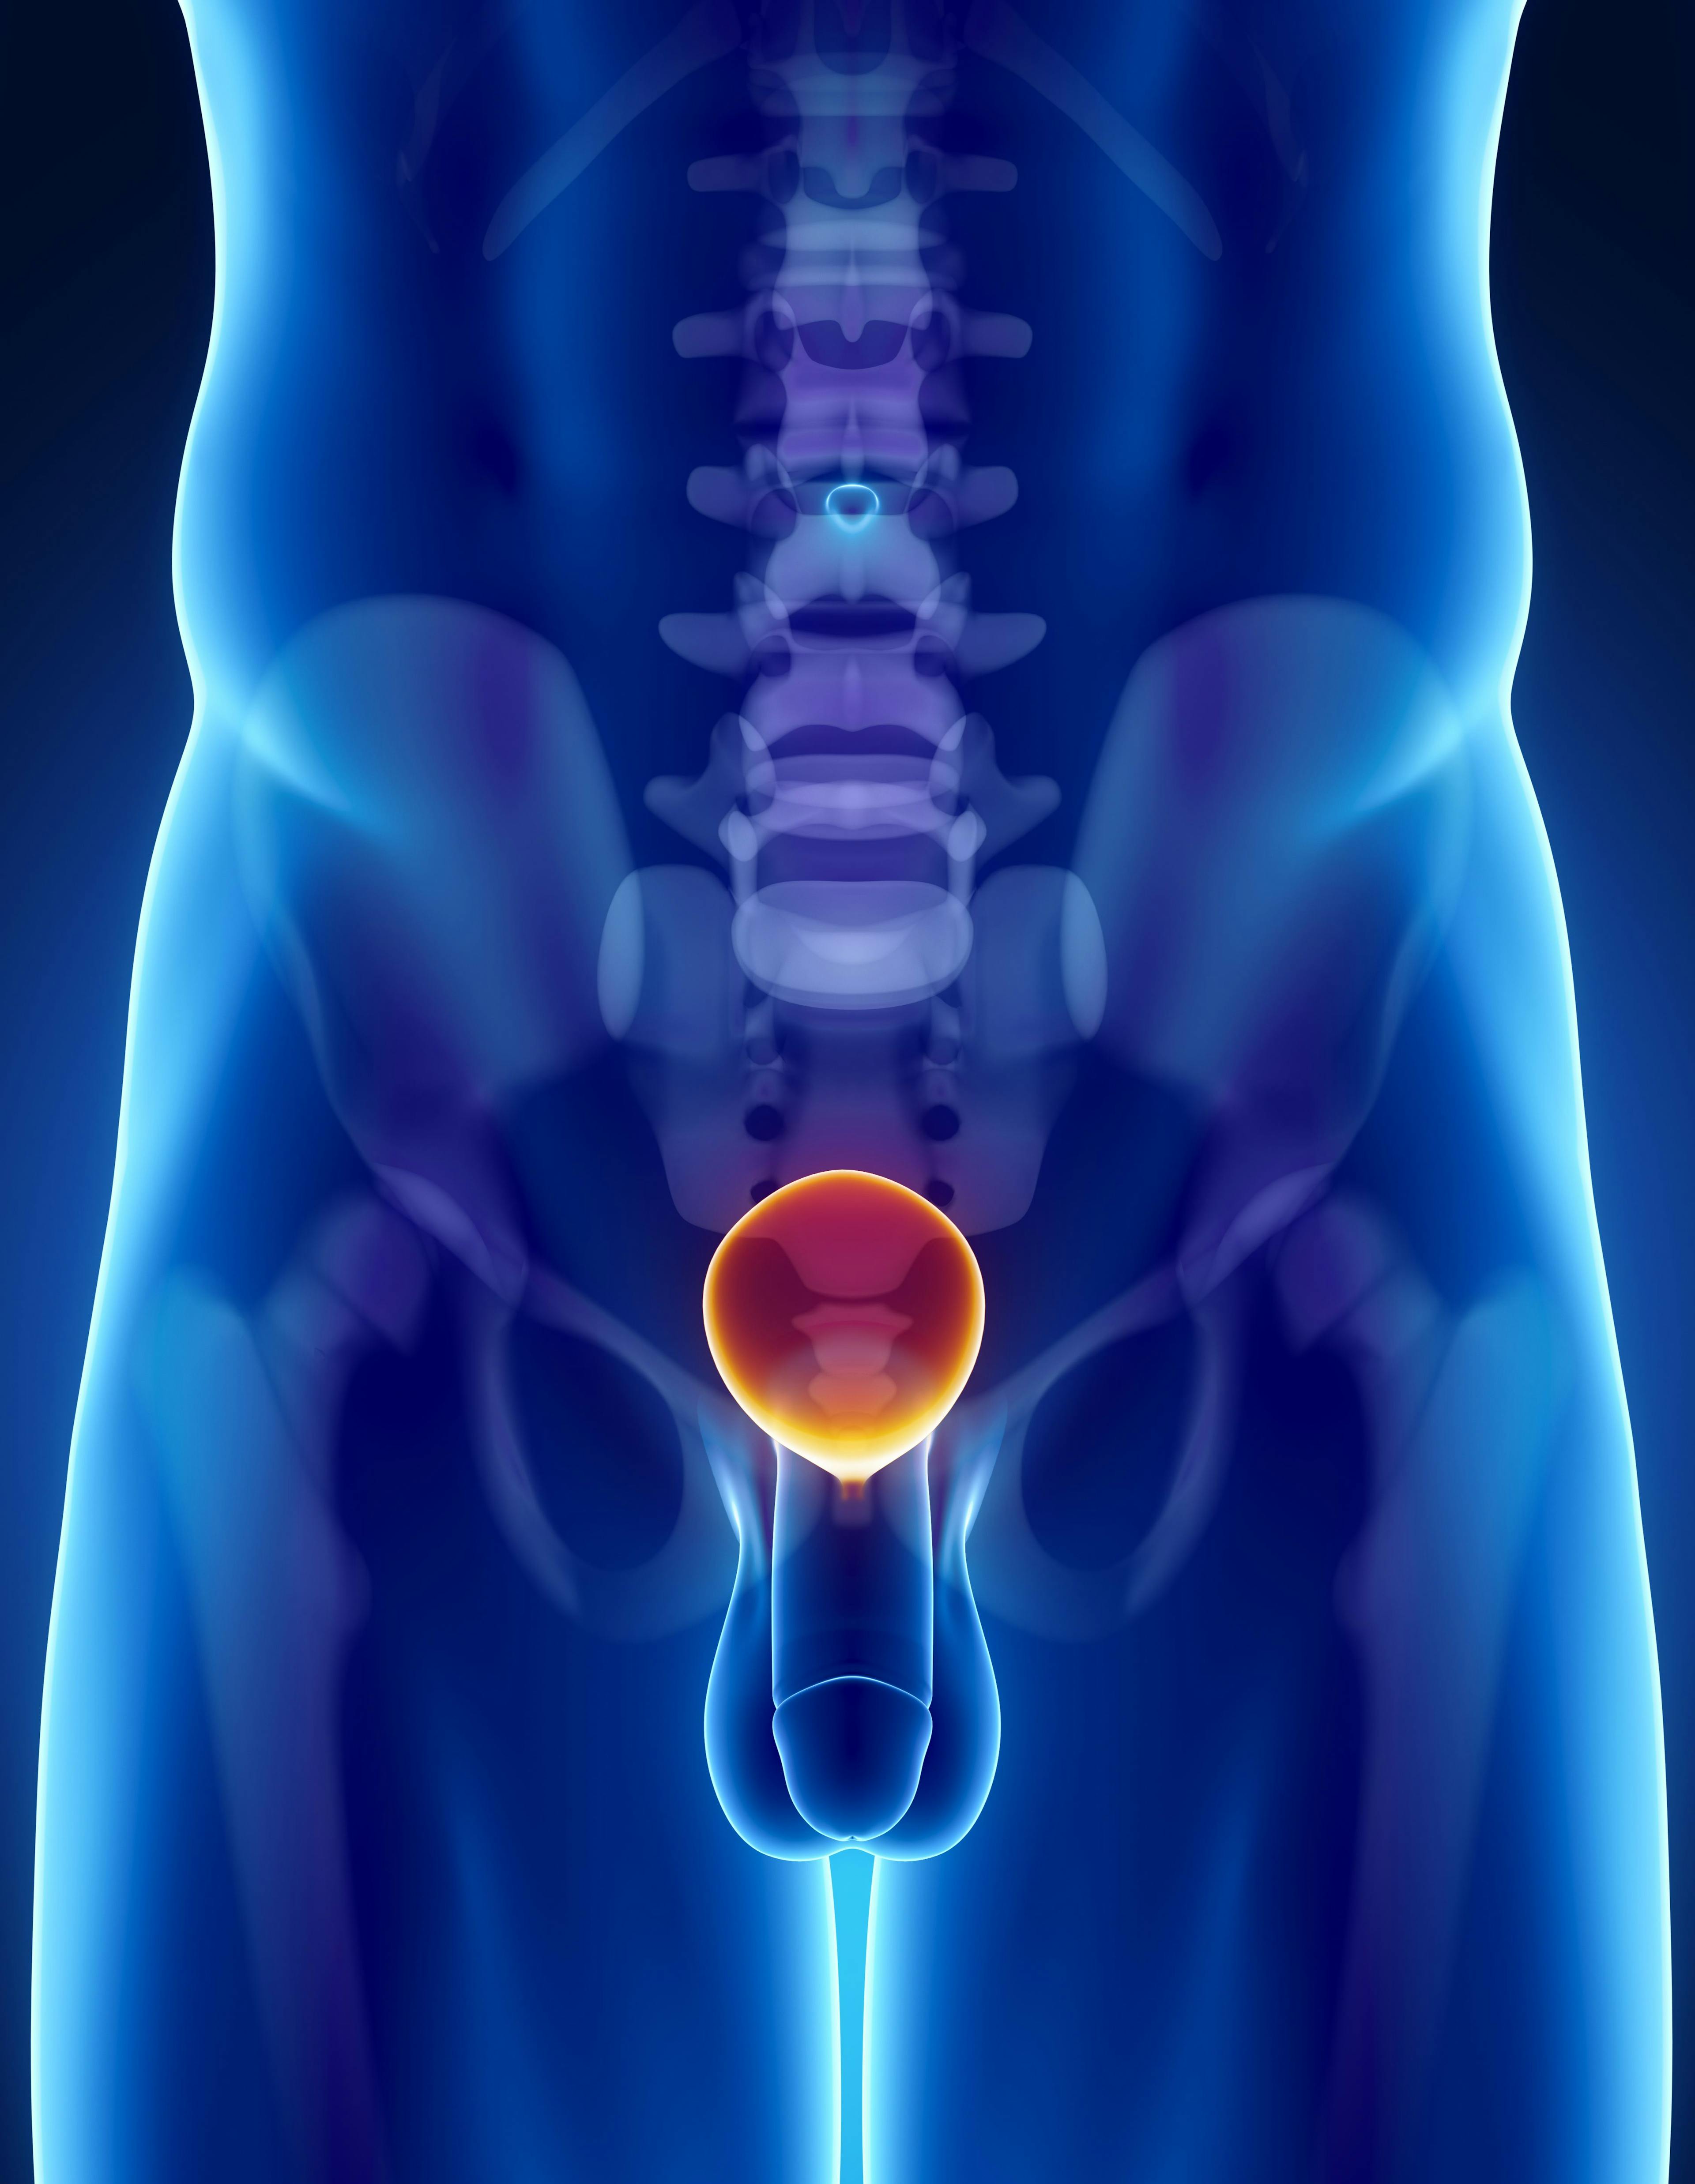 Treatment with 177Lu-PSMA-617 resulted in poor outcomes for patients with metastatic castration-resistant prostate cancer whose tumors had little to no prostate-specific membrane antigen expression.